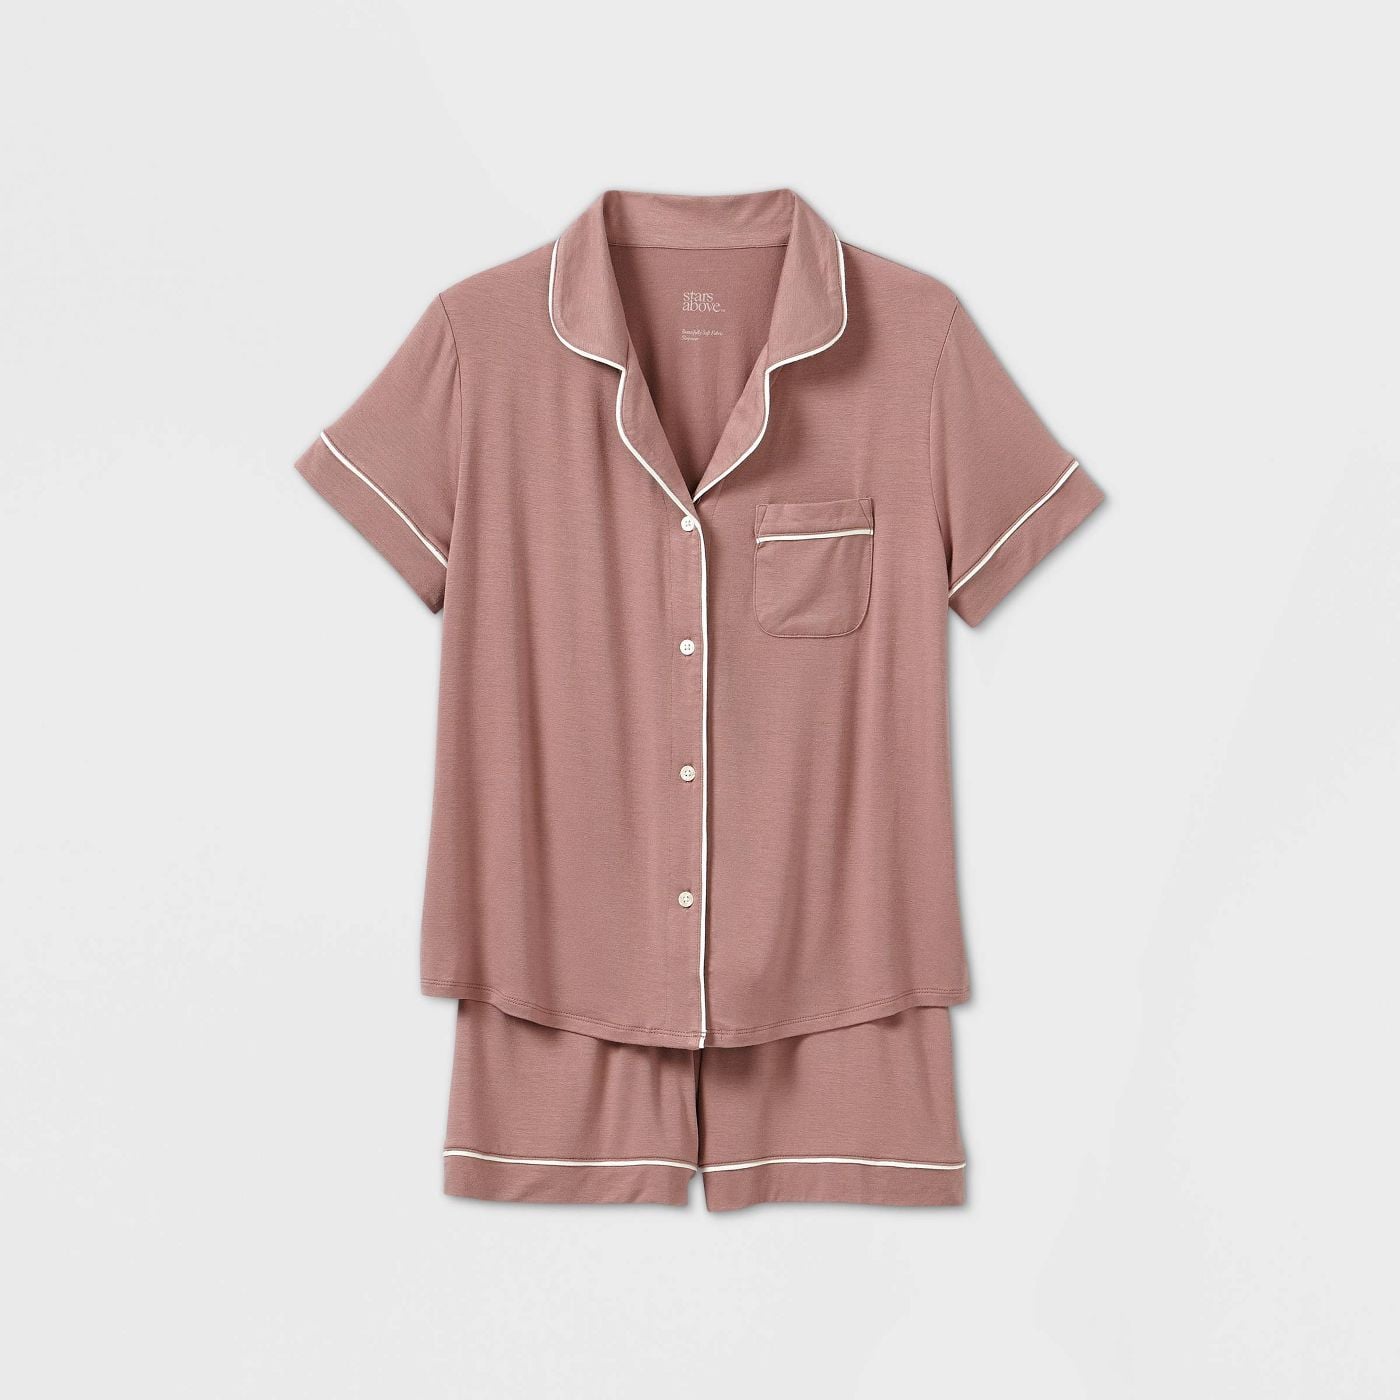 Adr Classic Knit Pajamas Set With Pockets, Short Sleeves, Lightweight  Shorts And Pajama Top Mauve X Small : Target